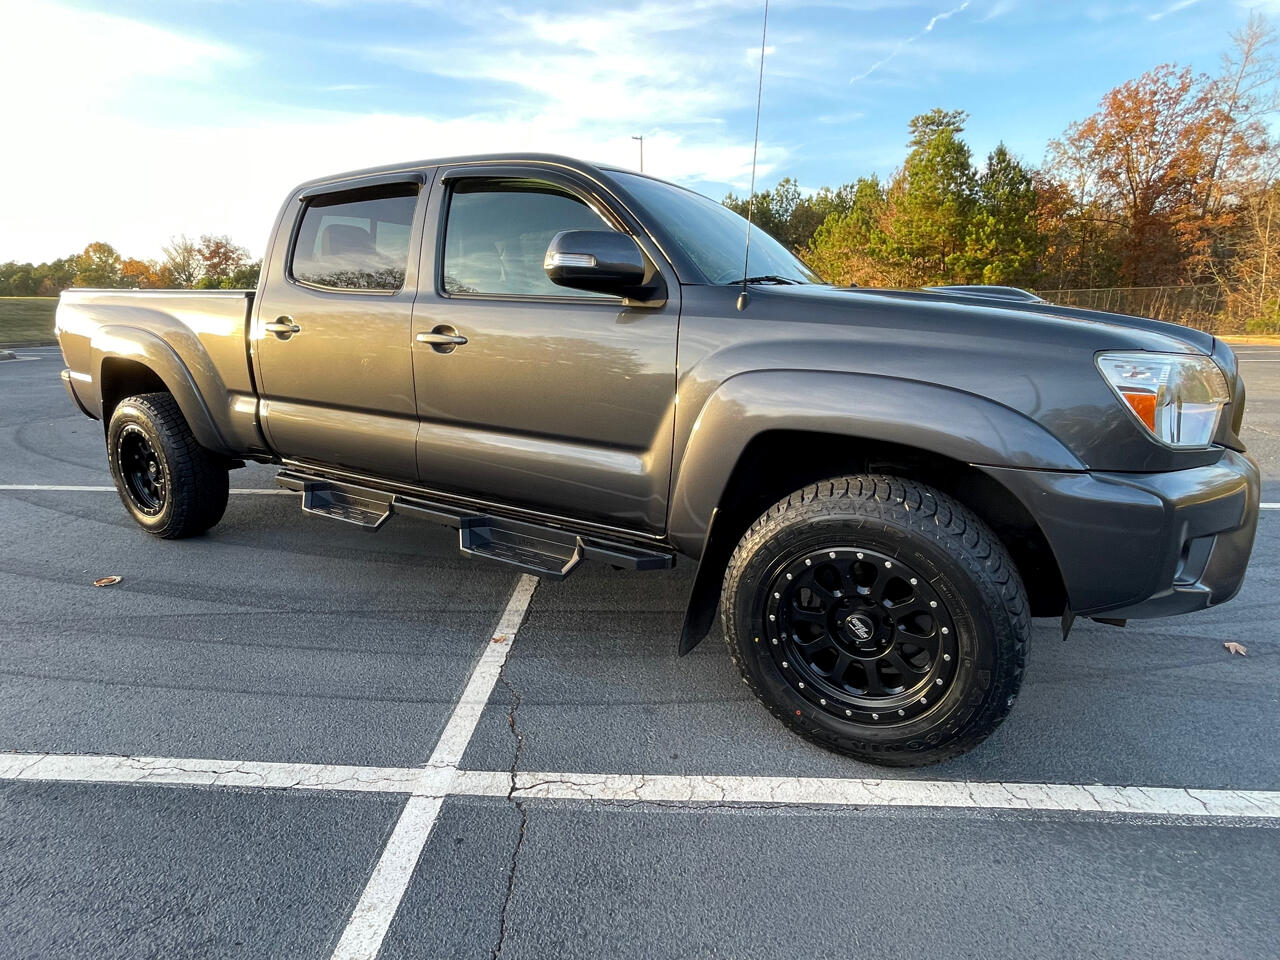 2014 Toyota Tacoma Double Cab Long Bed V6 5AT 4WD